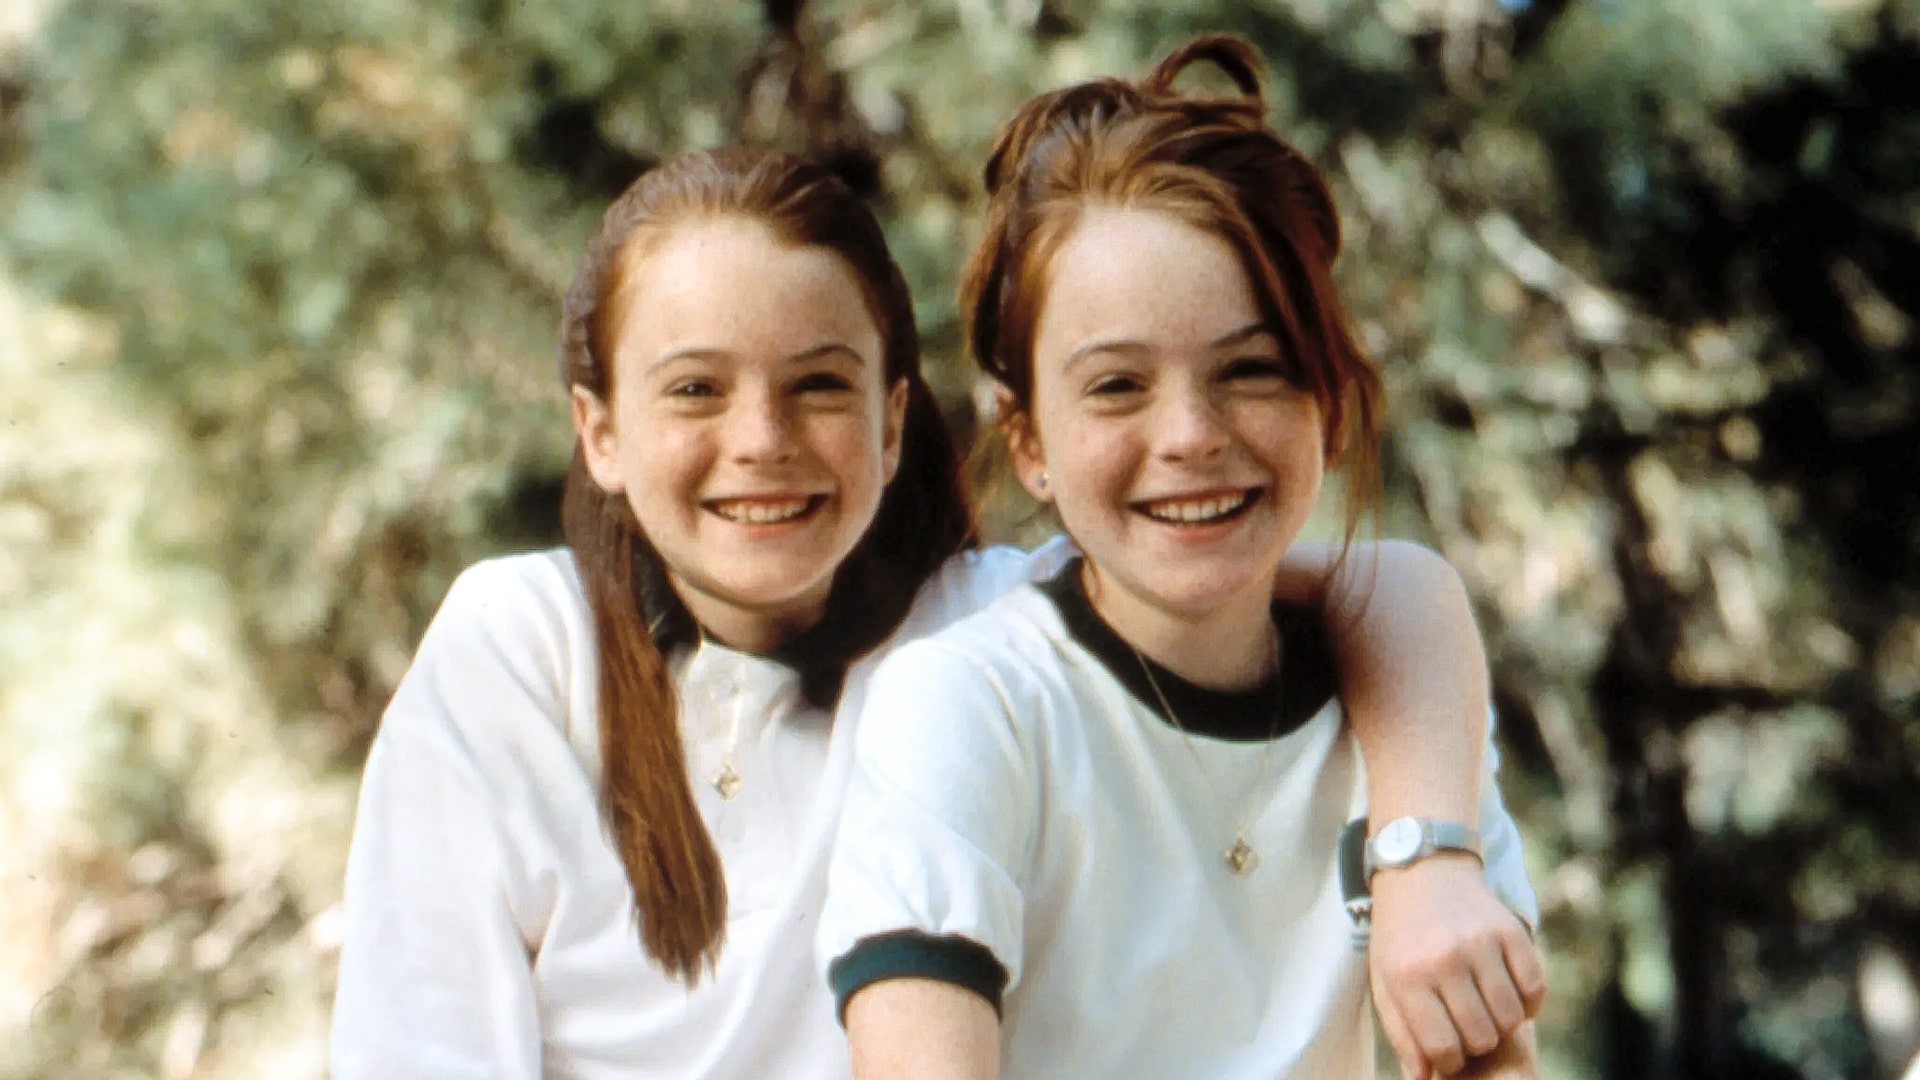 Is Parent Trap Based on a True Story